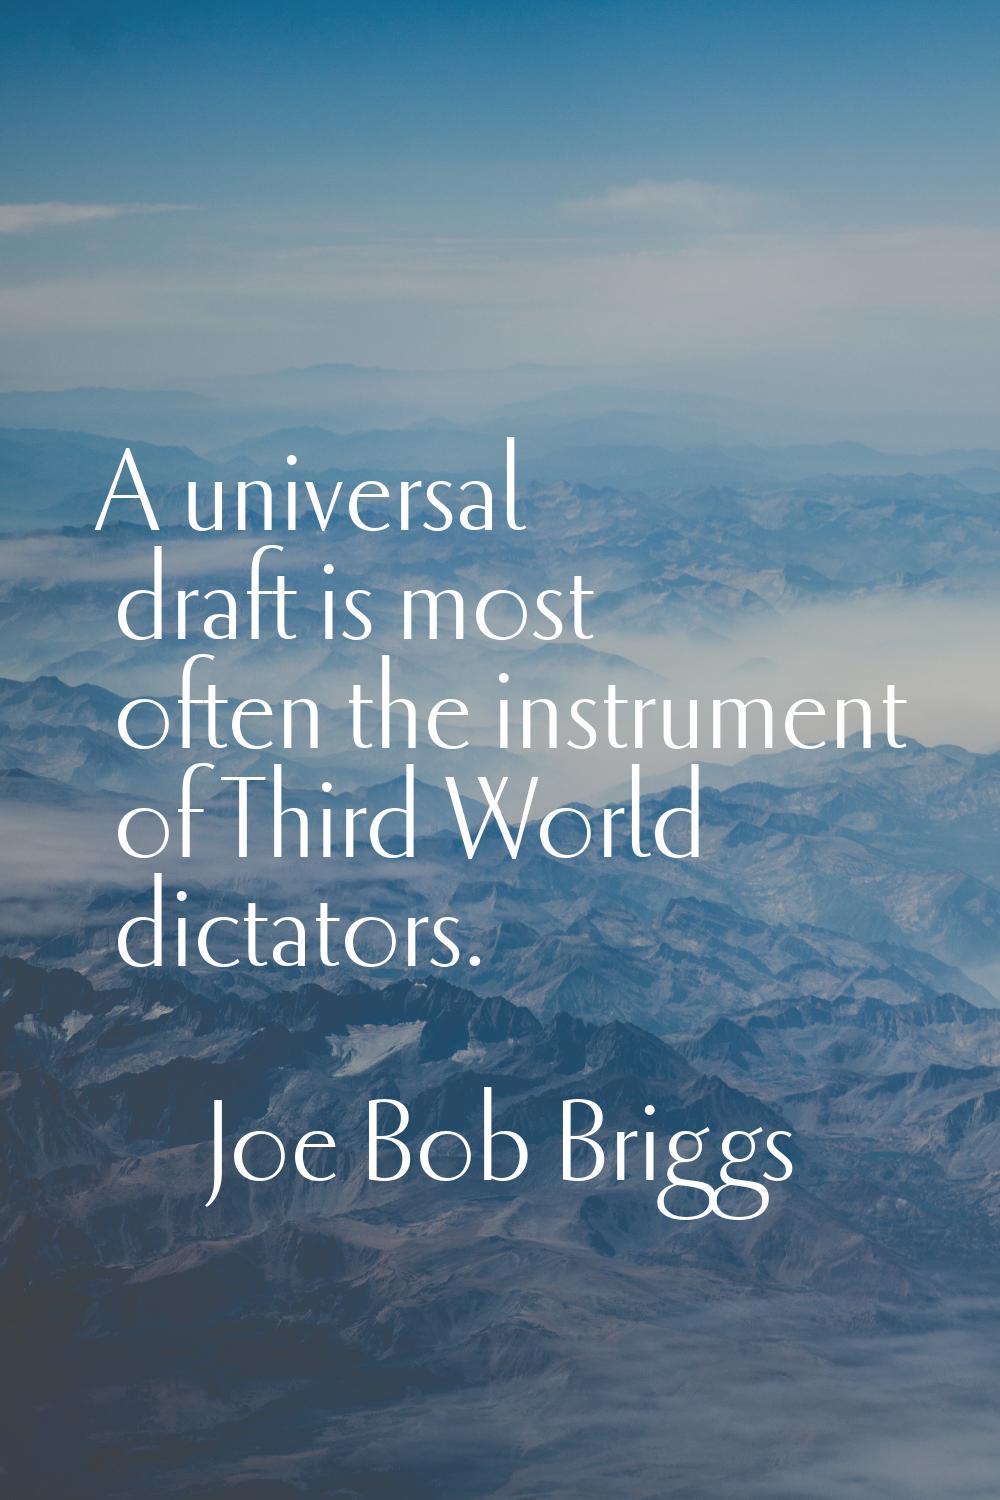 A universal draft is most often the instrument of Third World dictators.